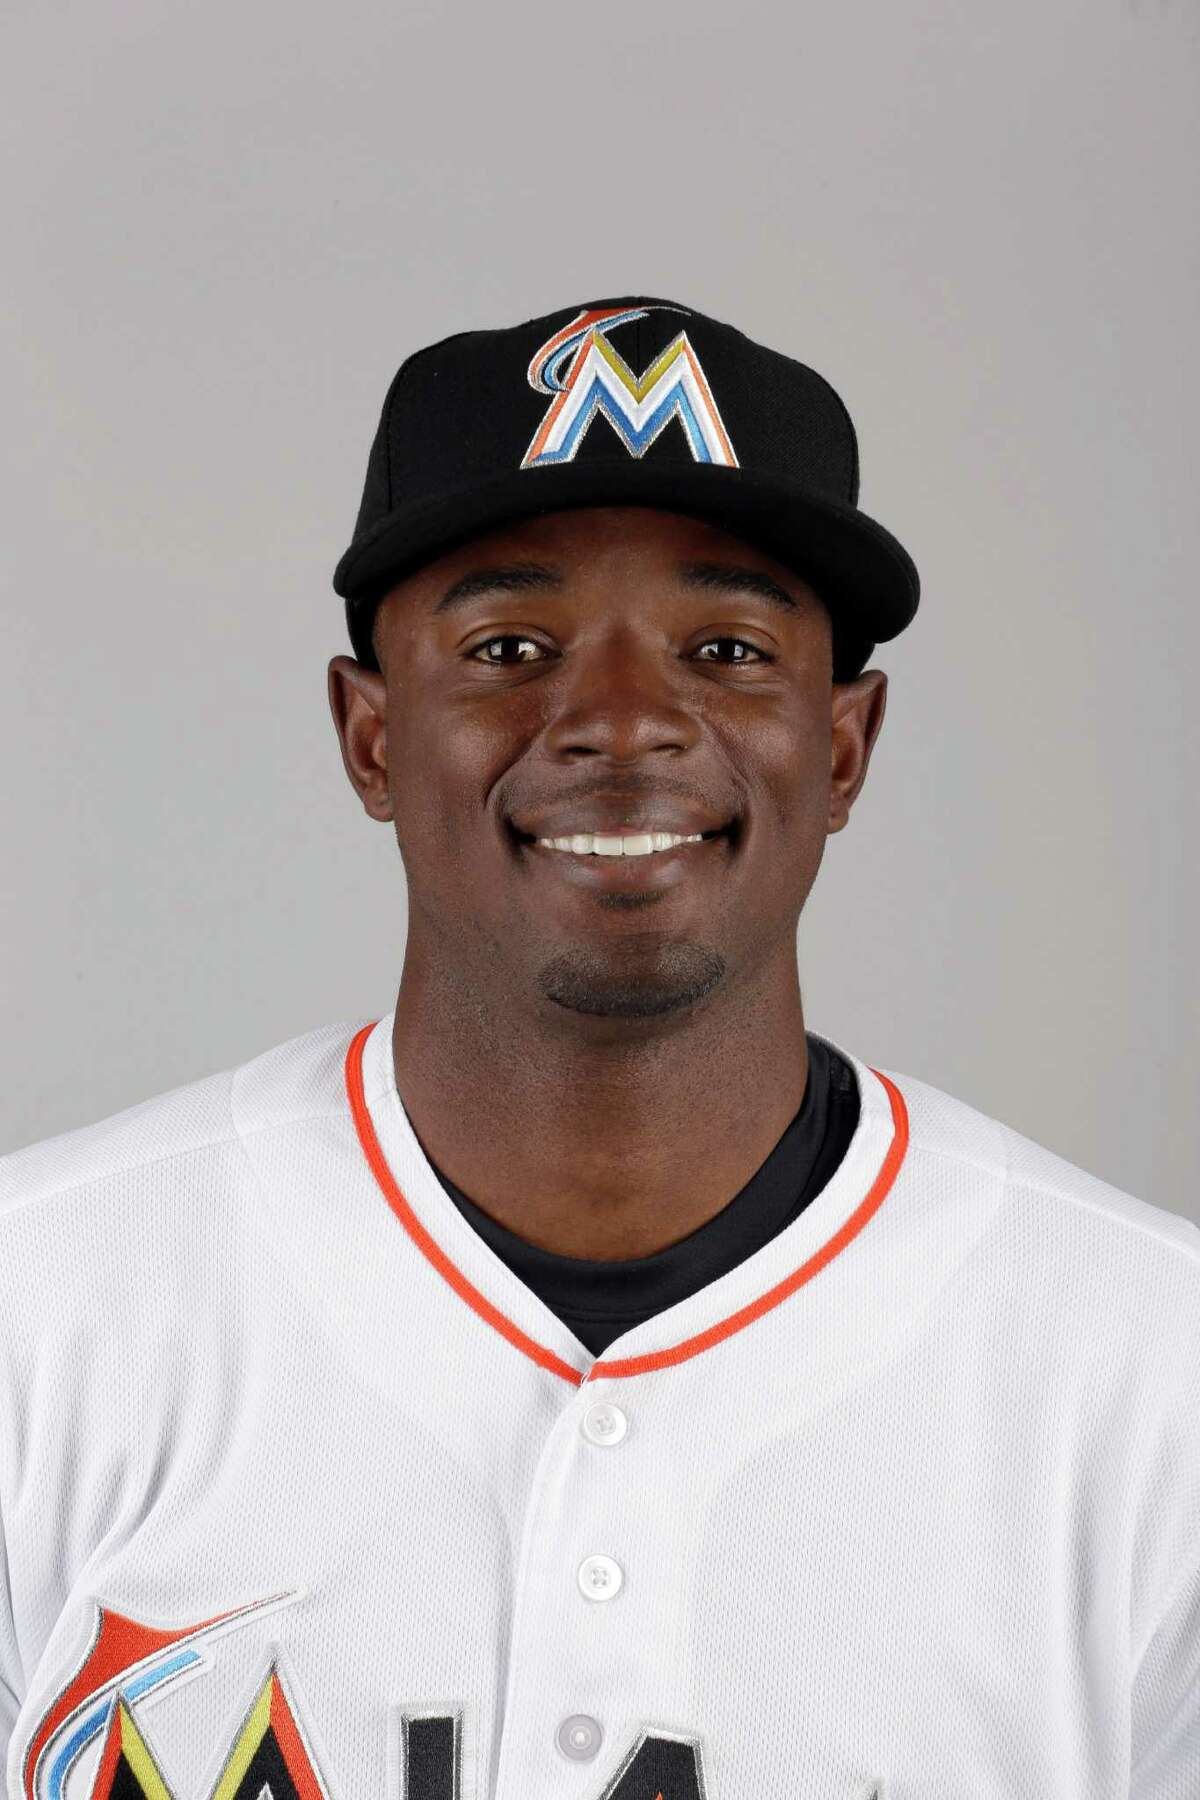 Suspended Marlins star Dee Gordon says he unknowingly took steroids